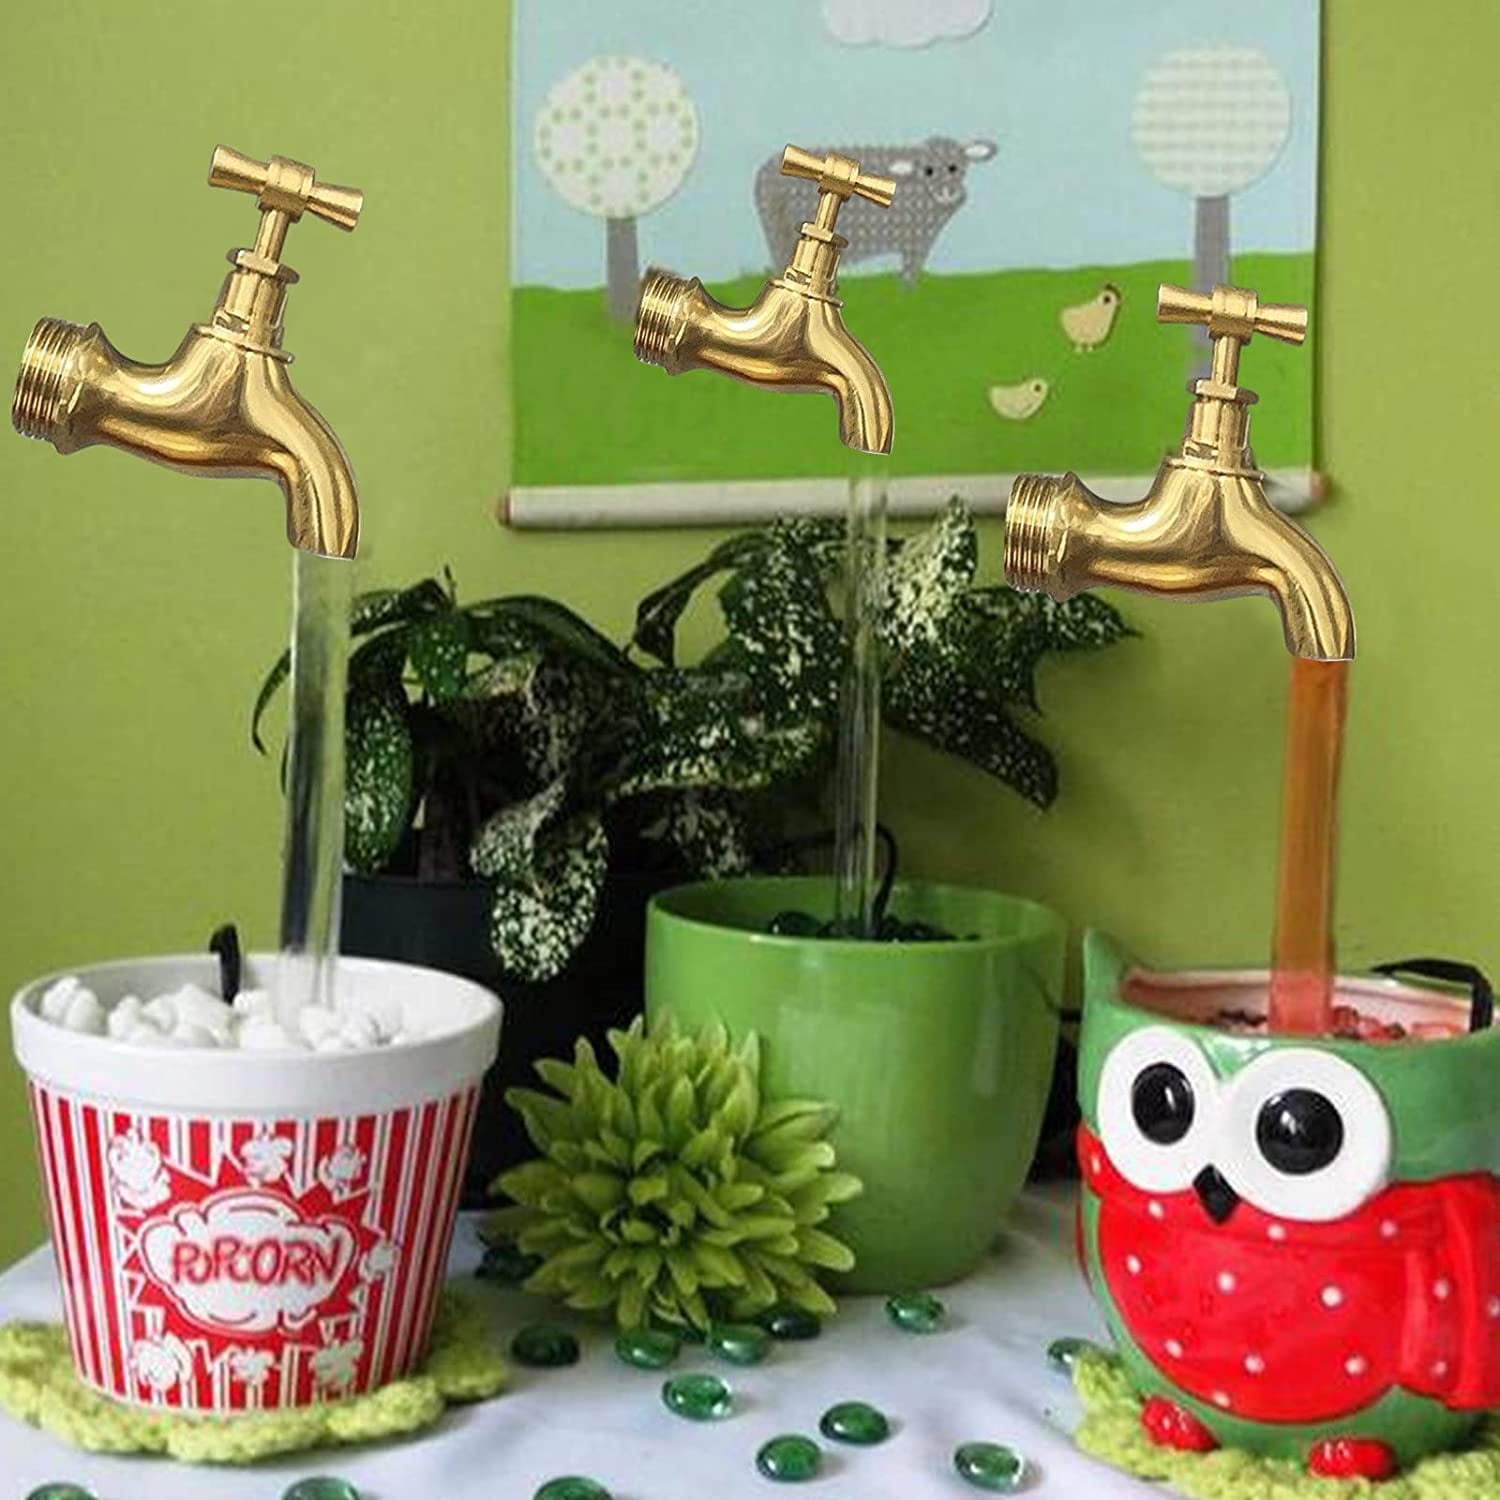 3 Kits Floating Faucet DIY Yard Art Decor Magic Flowing Spout Watering Can Fountain Invisible Faucet Fountain with Pump Decoration for Garden Home Yard Floating Tap Fountain 